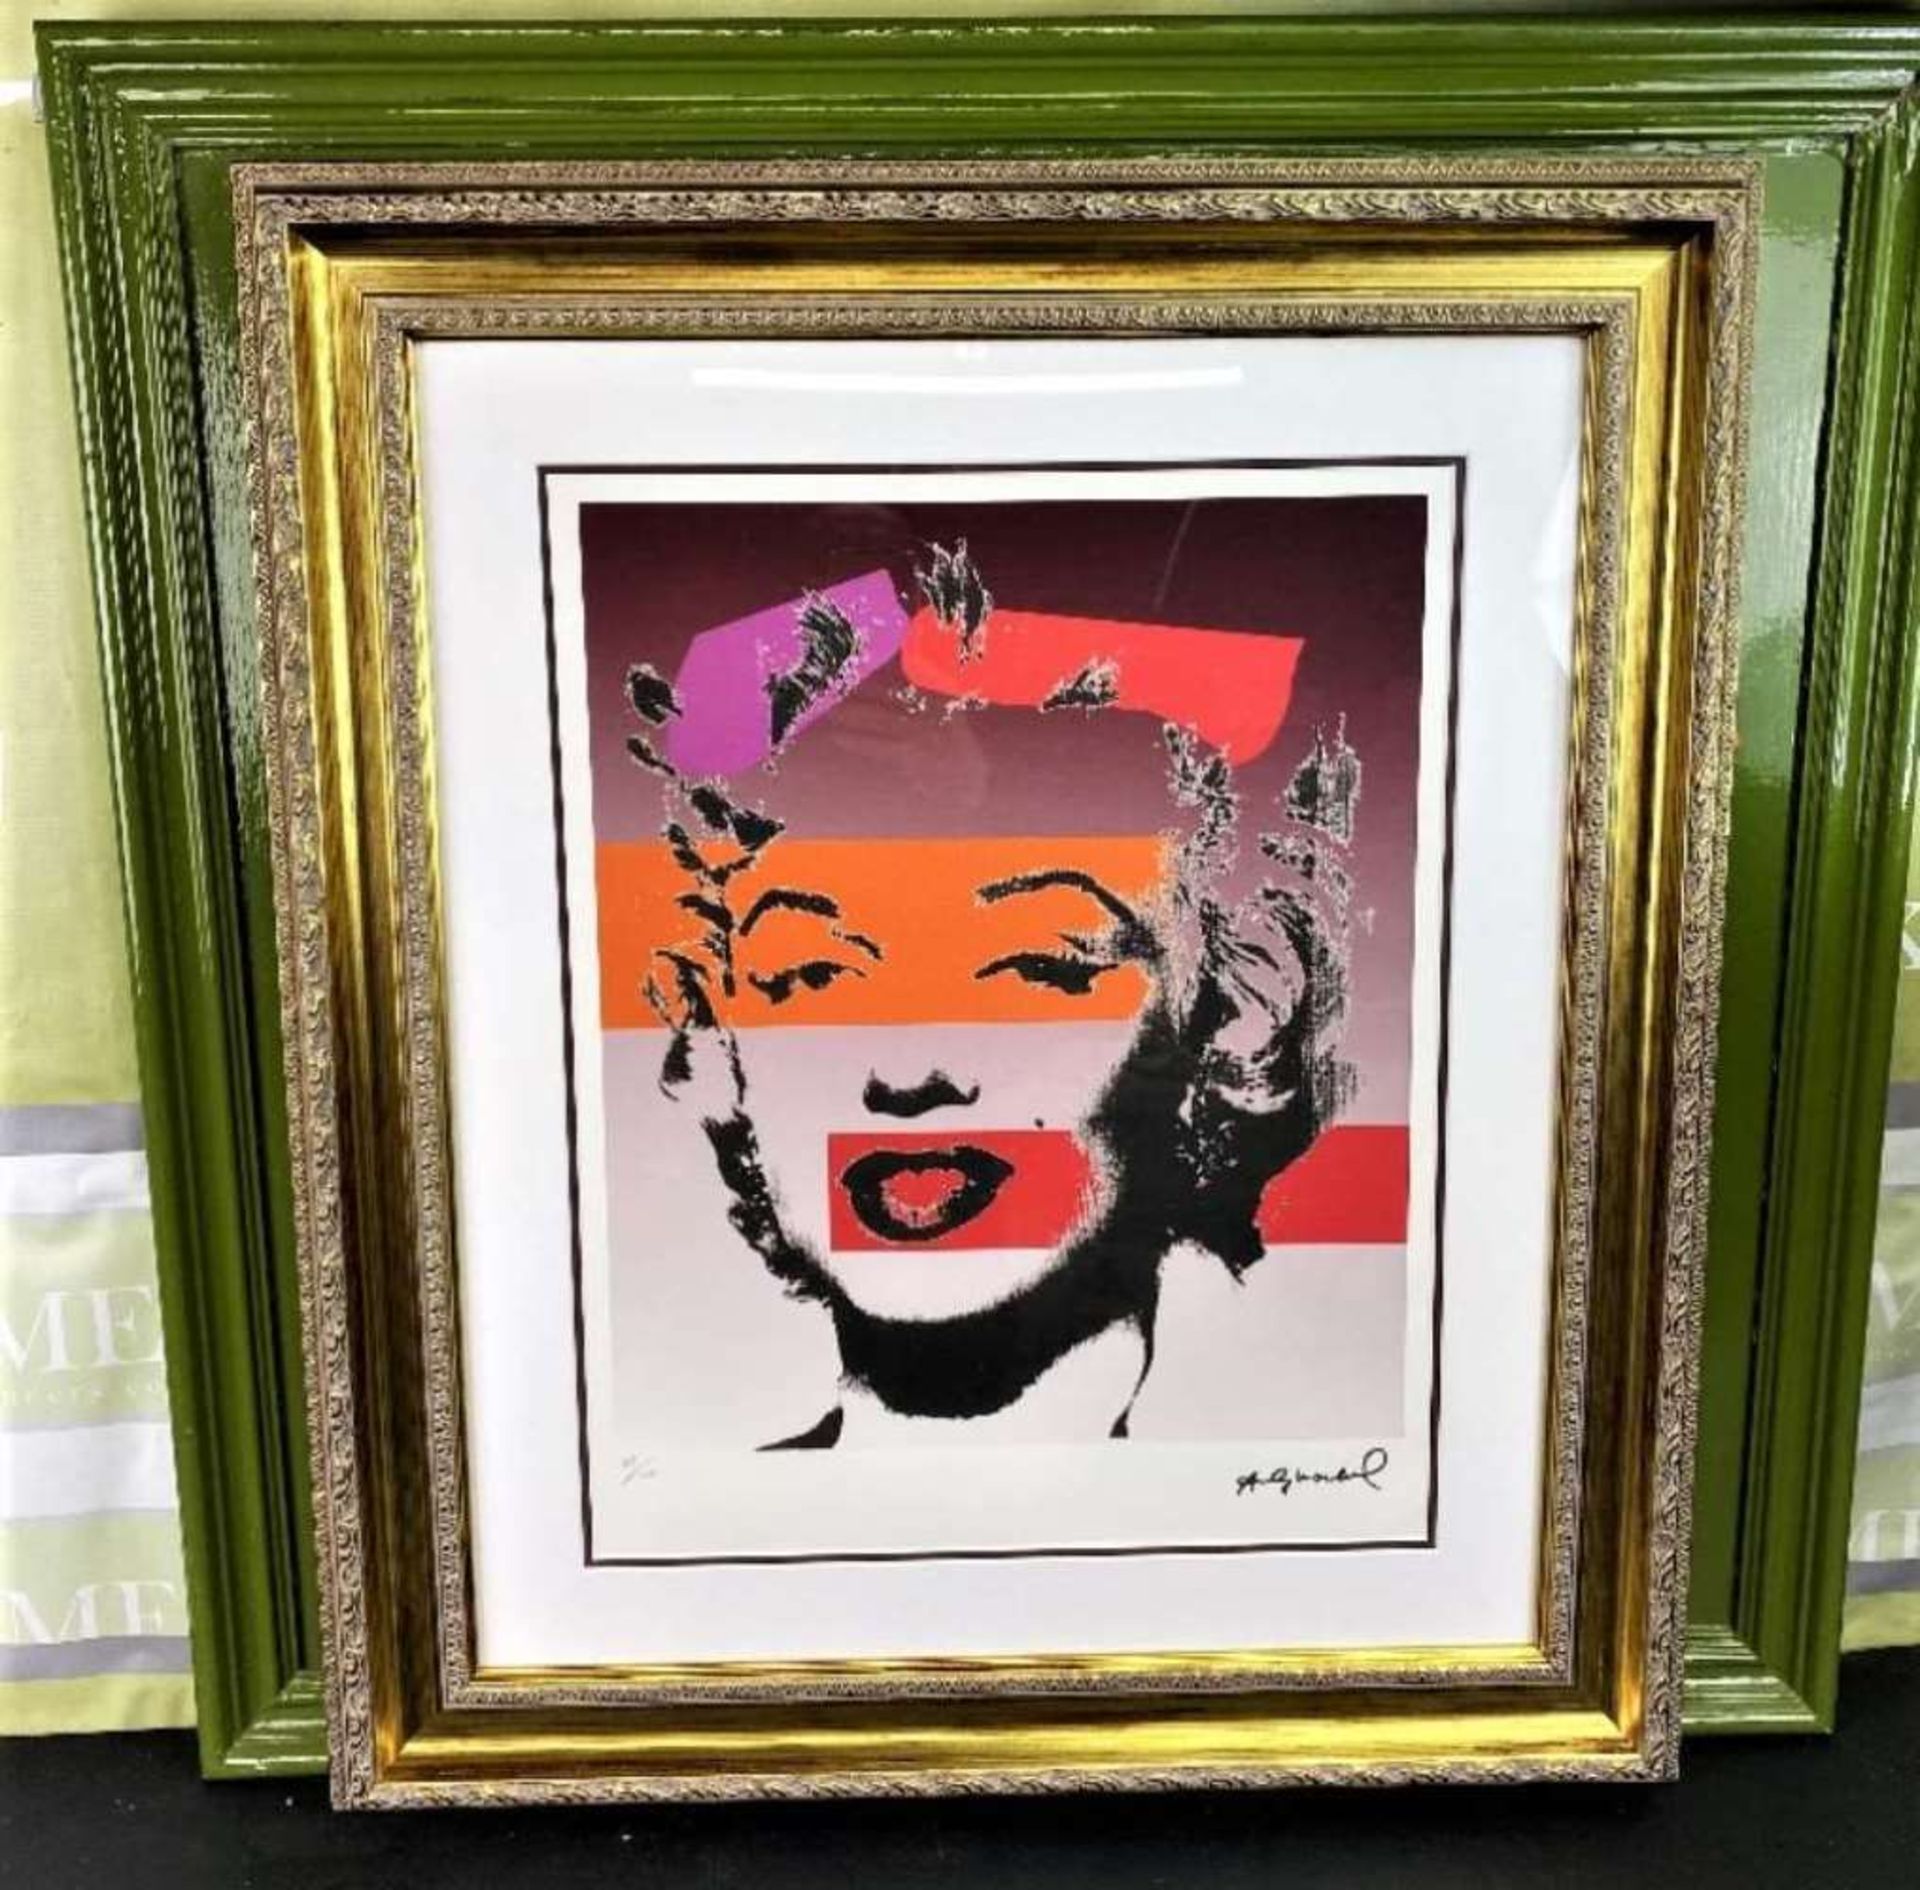 Andy Warhol (1928-1987) “Marilyn” Leo Castelli Gallery-New York Numbered Ltd Edition of 100 Lithogra - Image 7 of 7